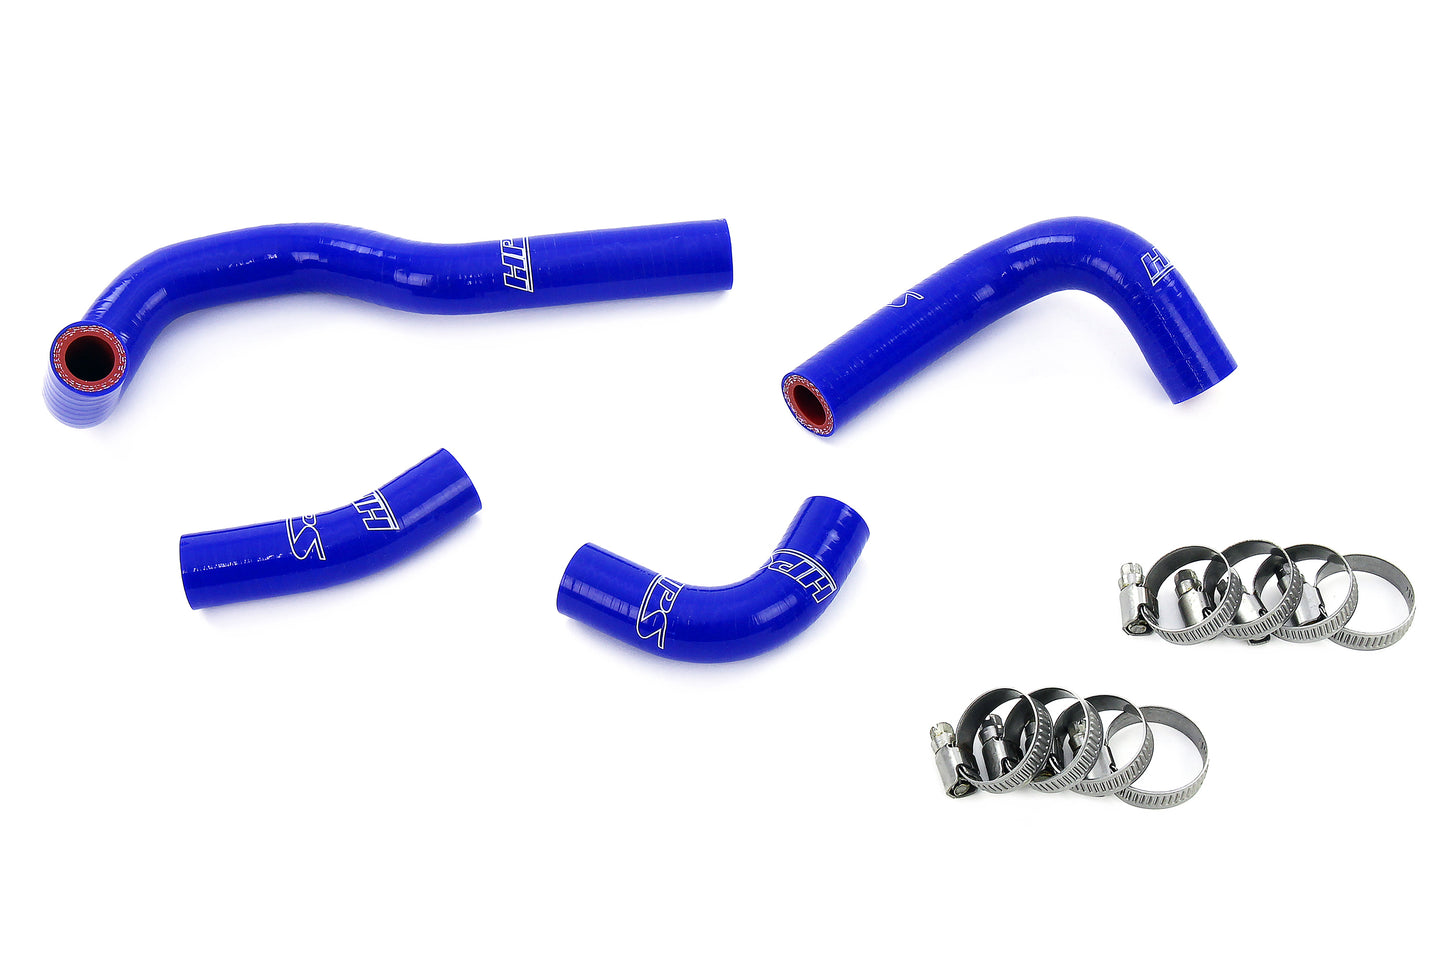 HPS Silicone Heater hoses Toyota 1993-2002 Supra Right Hand Drive 3.0L Turbo 2JZ-GTE